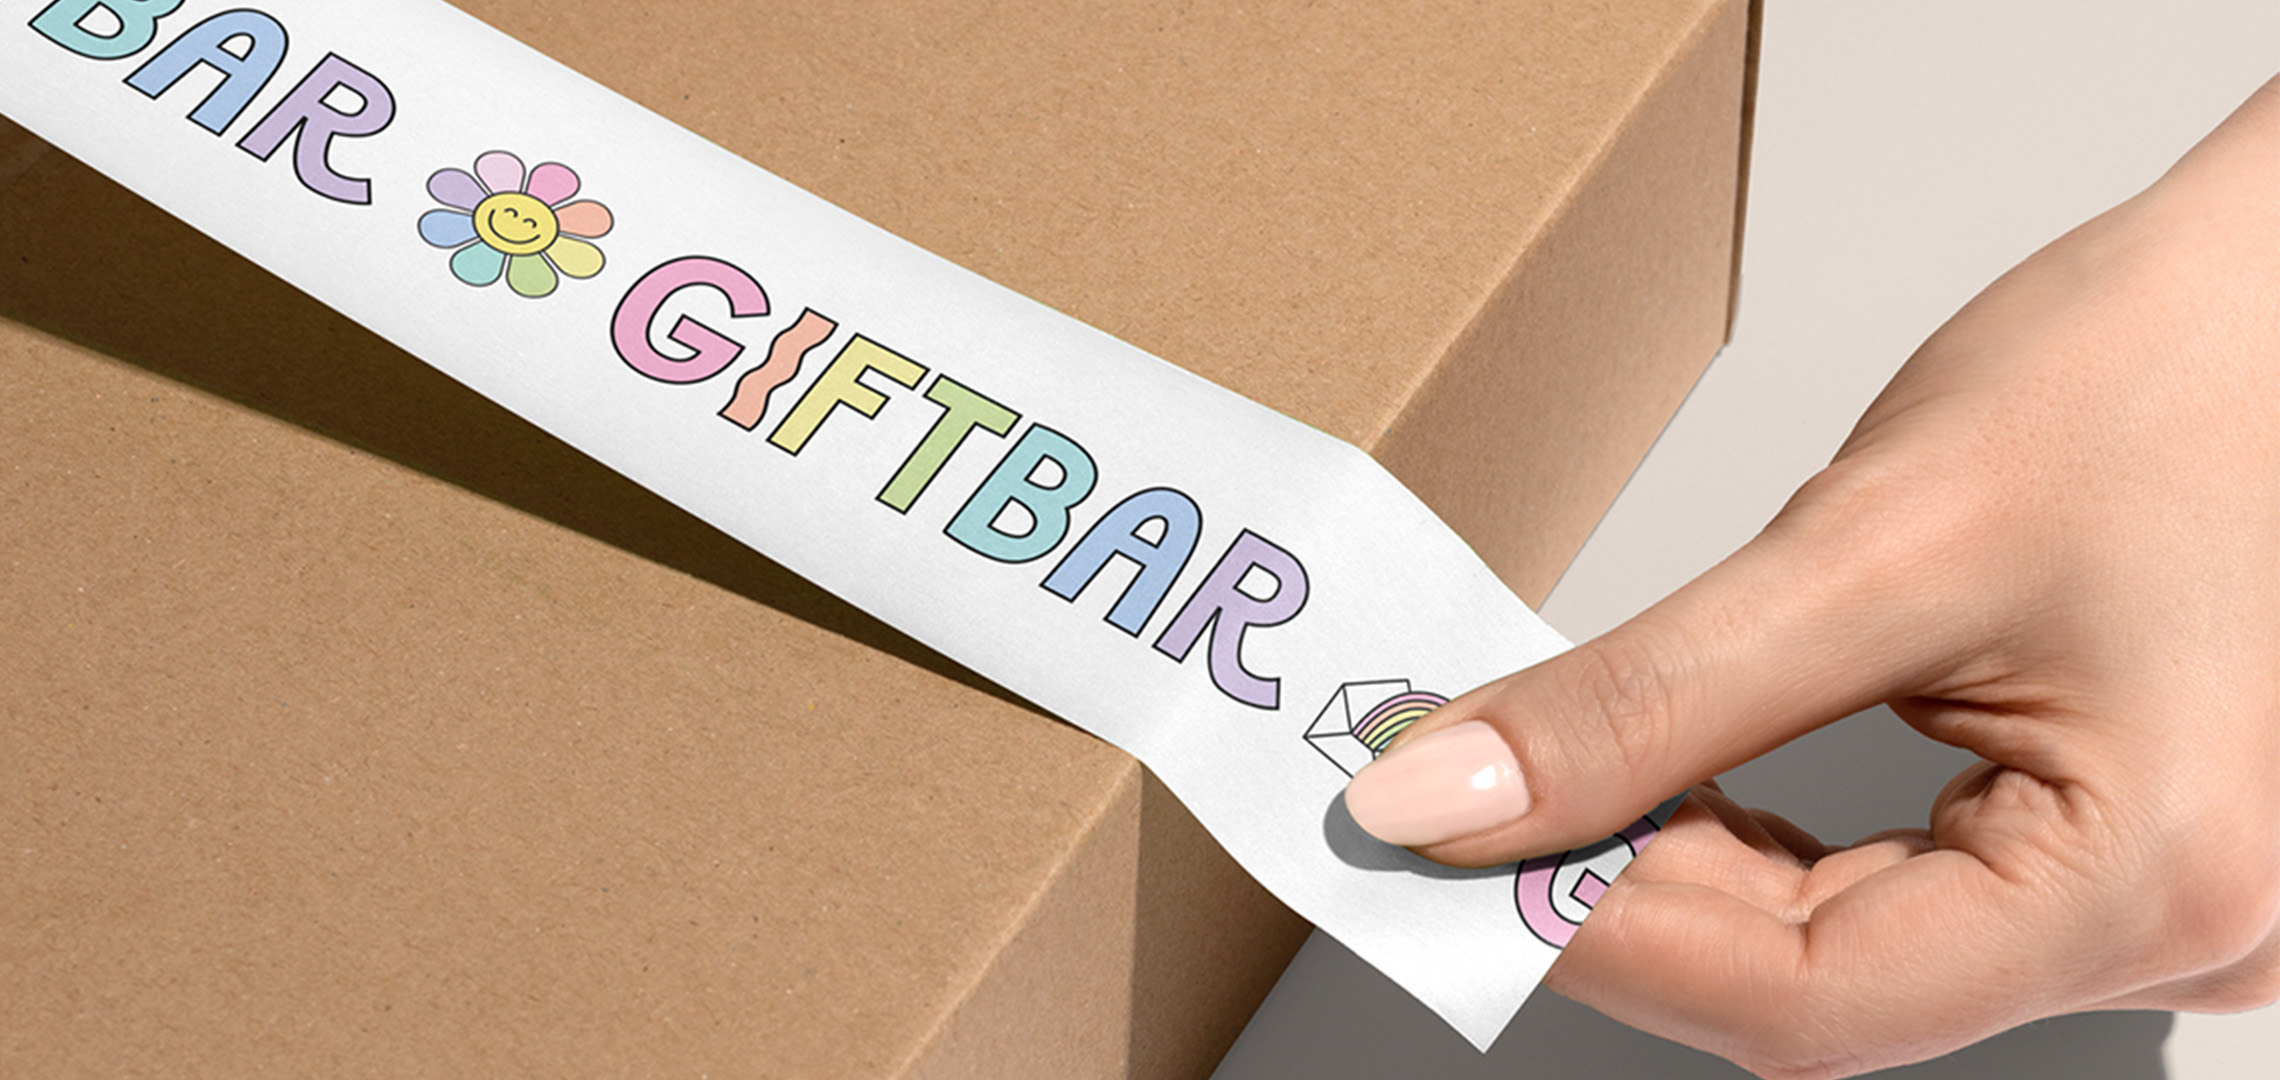 Giftbar - packaging tape design for a brick and mortar gift shop.